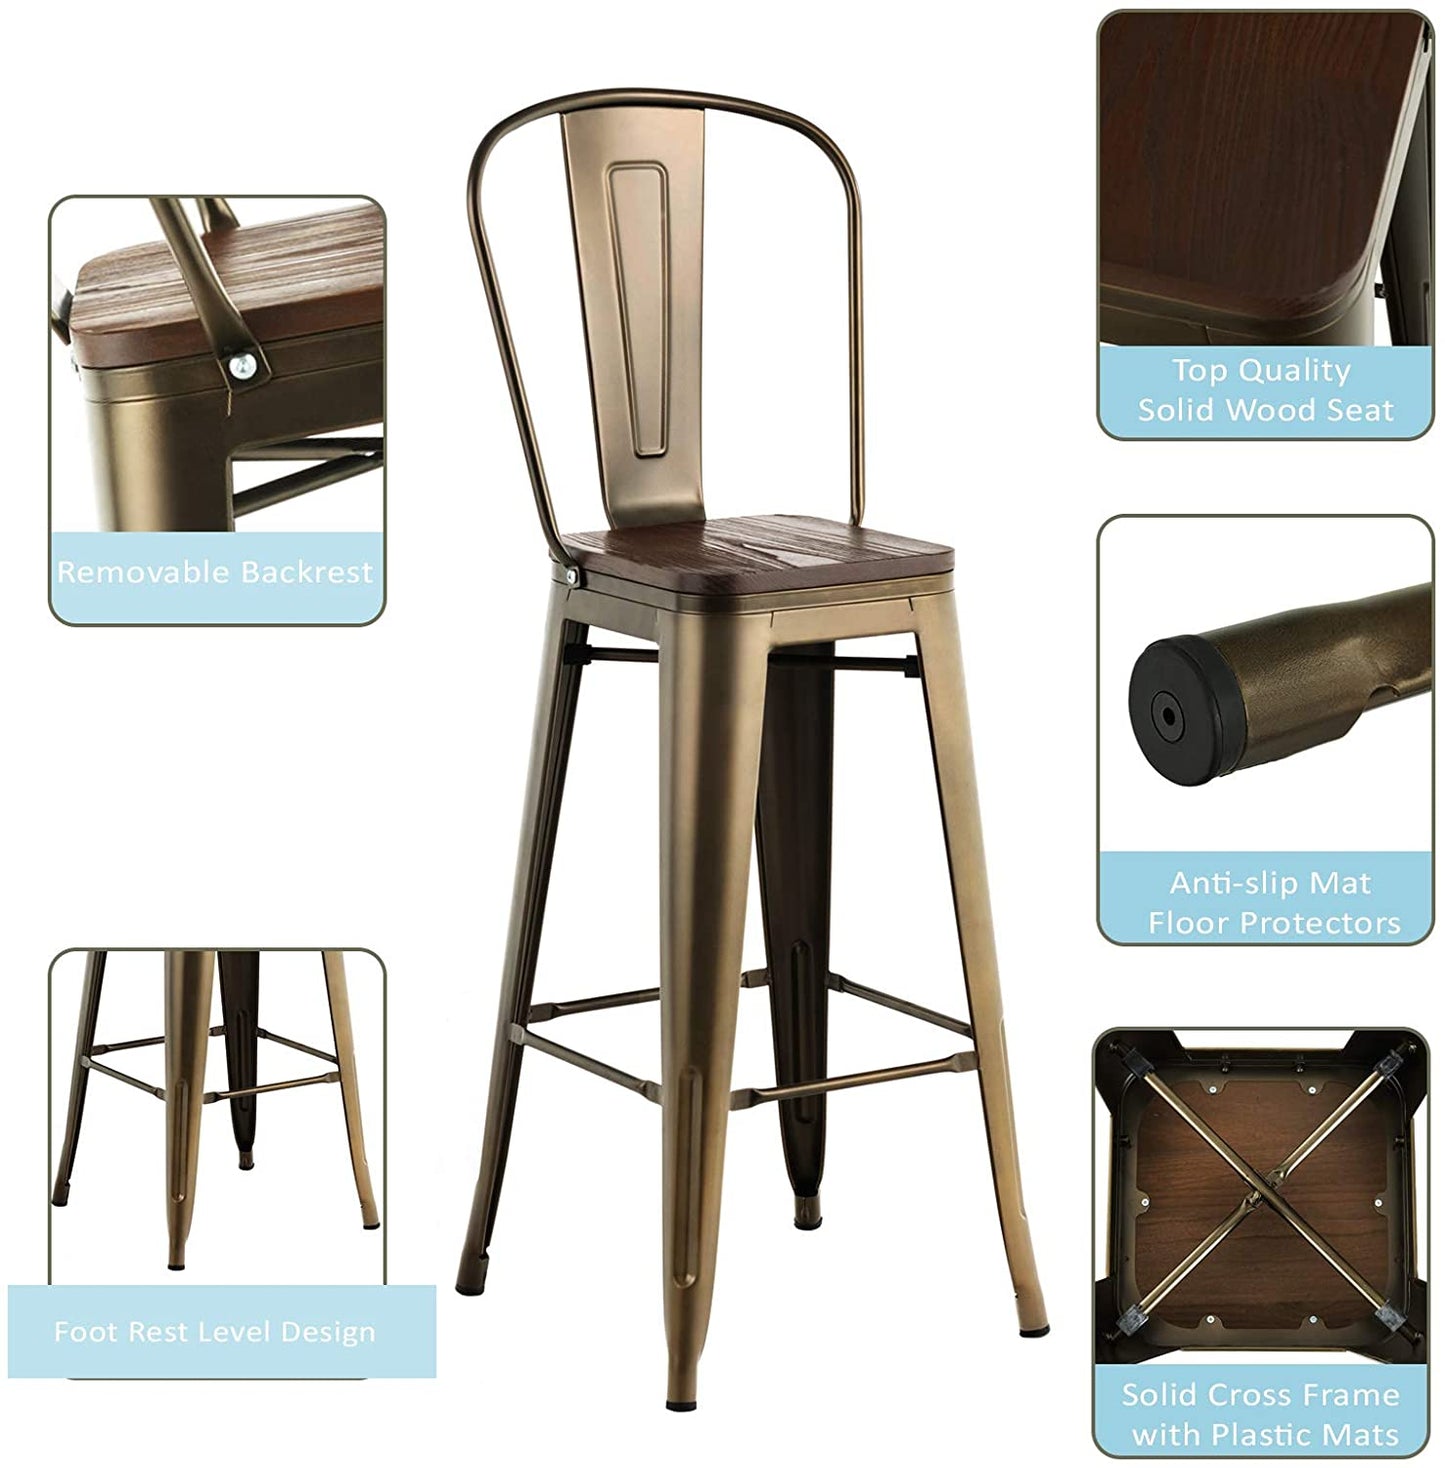 BAR STOOLS with backs 30" high - 4 Pack